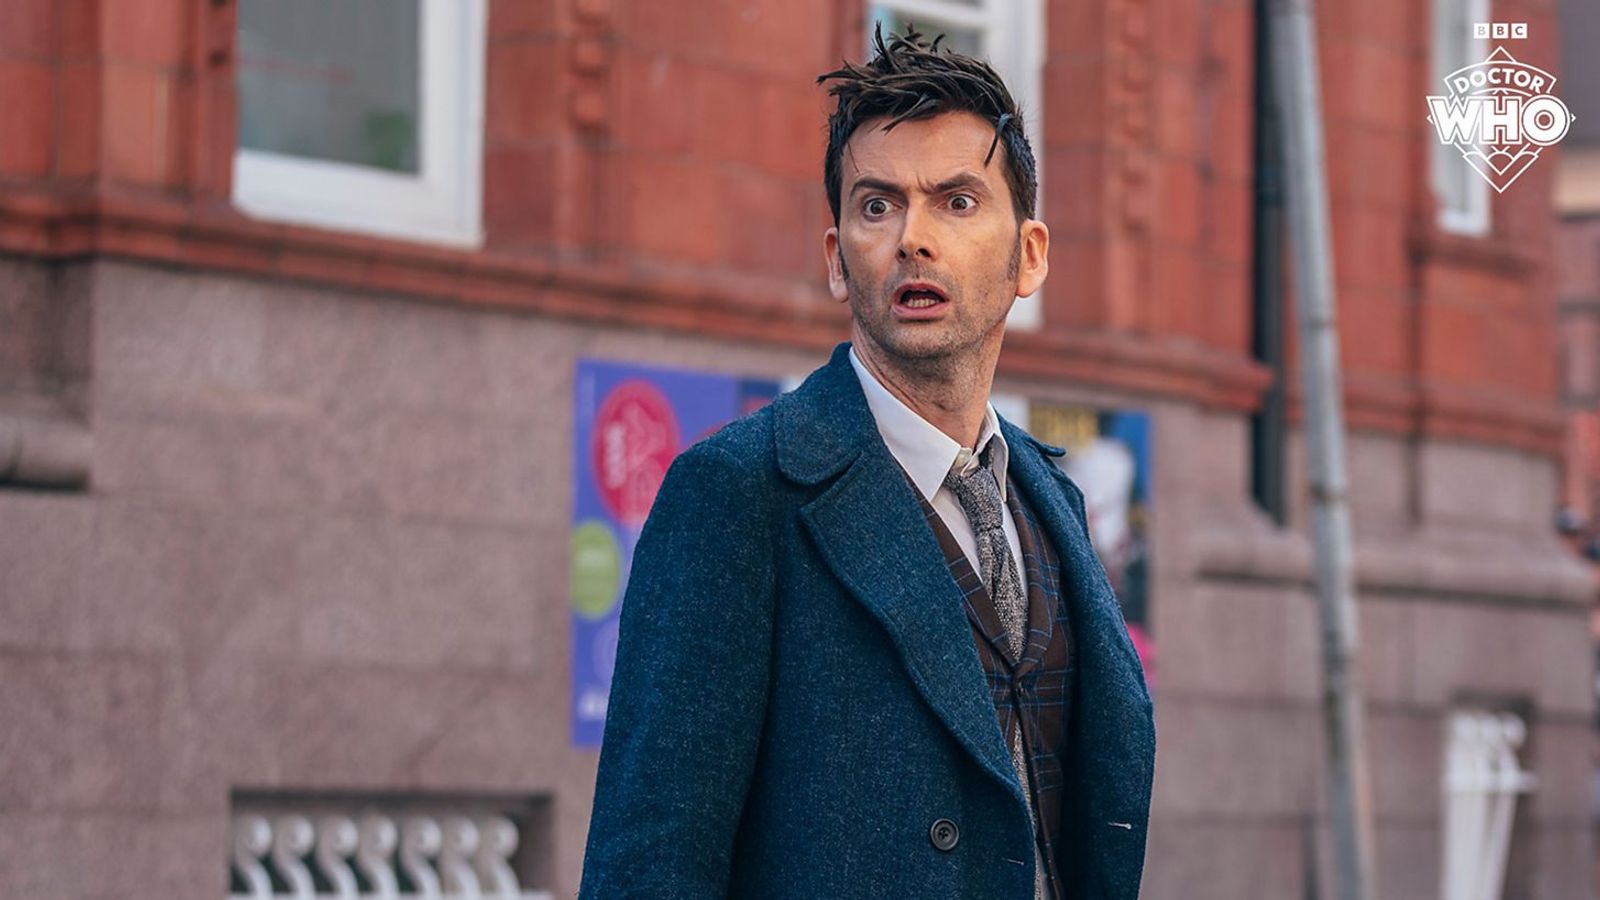 Doctor Who: David Tennant and Catherine Tate appear in latest trailer - as Neil Patrick Harris is revealed to be a villain